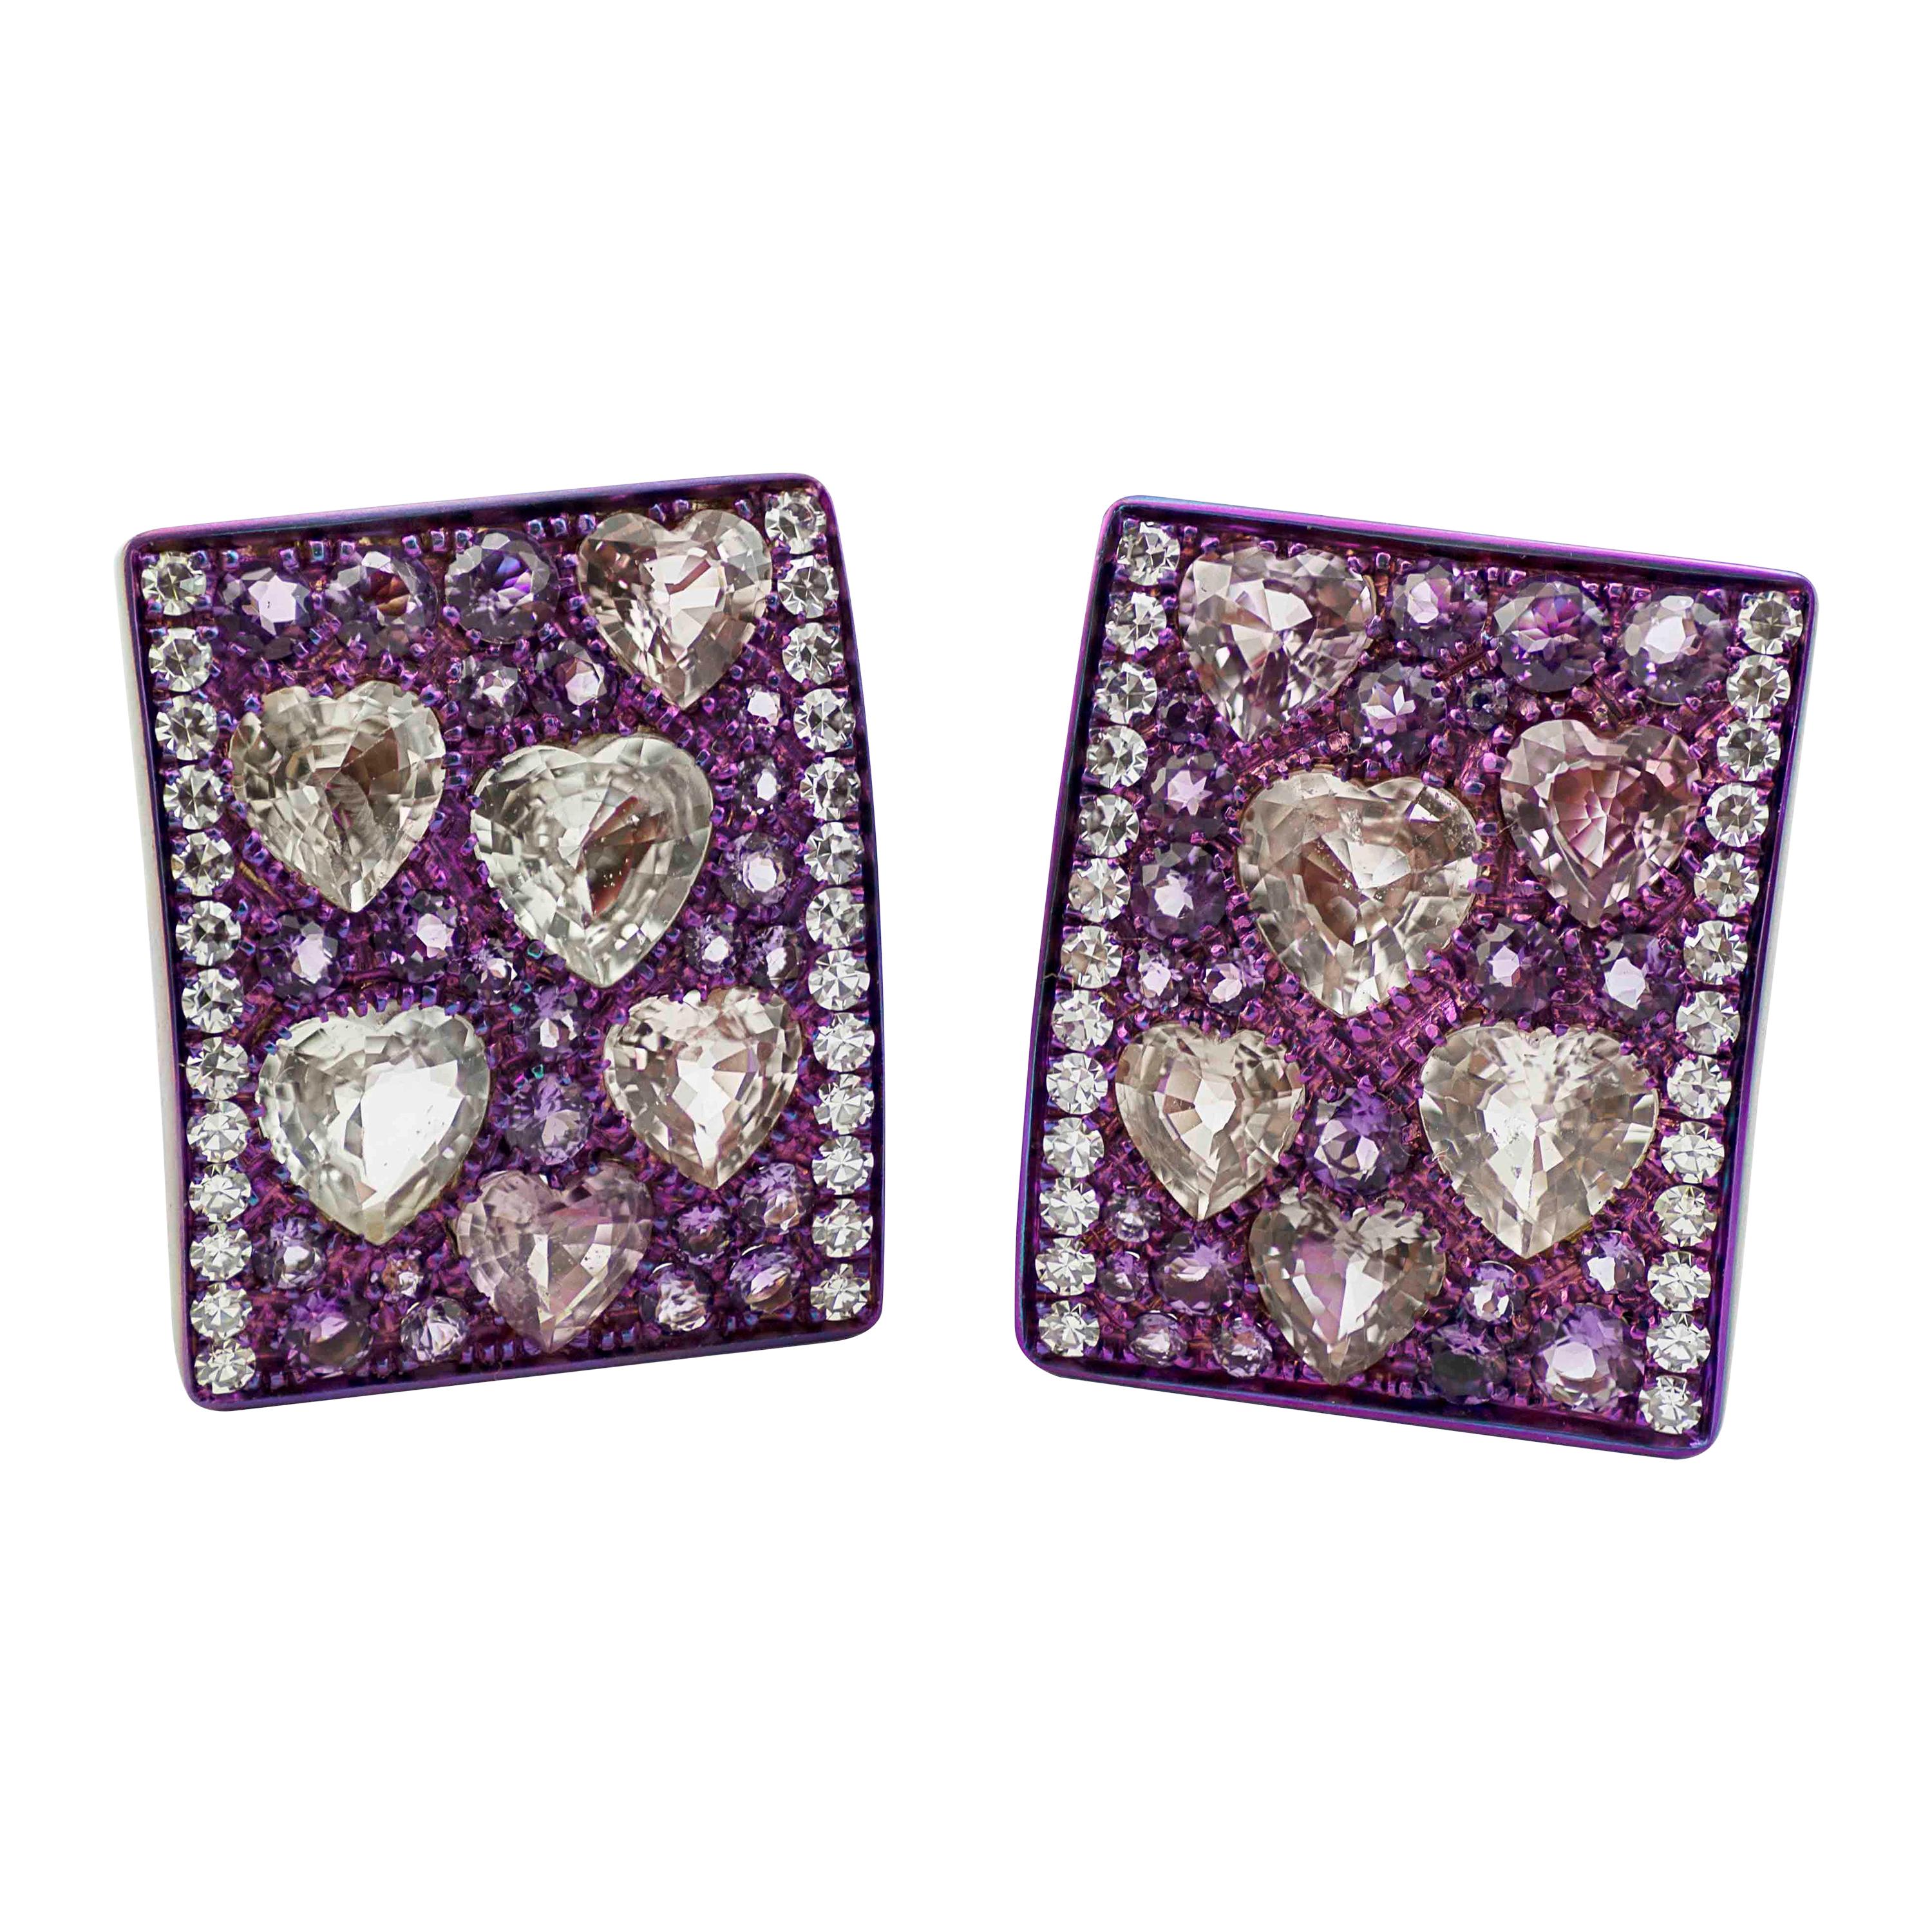 Diamond Heart Sapphires Amethyst Rose Gold Titanium Made in Italy Earrings